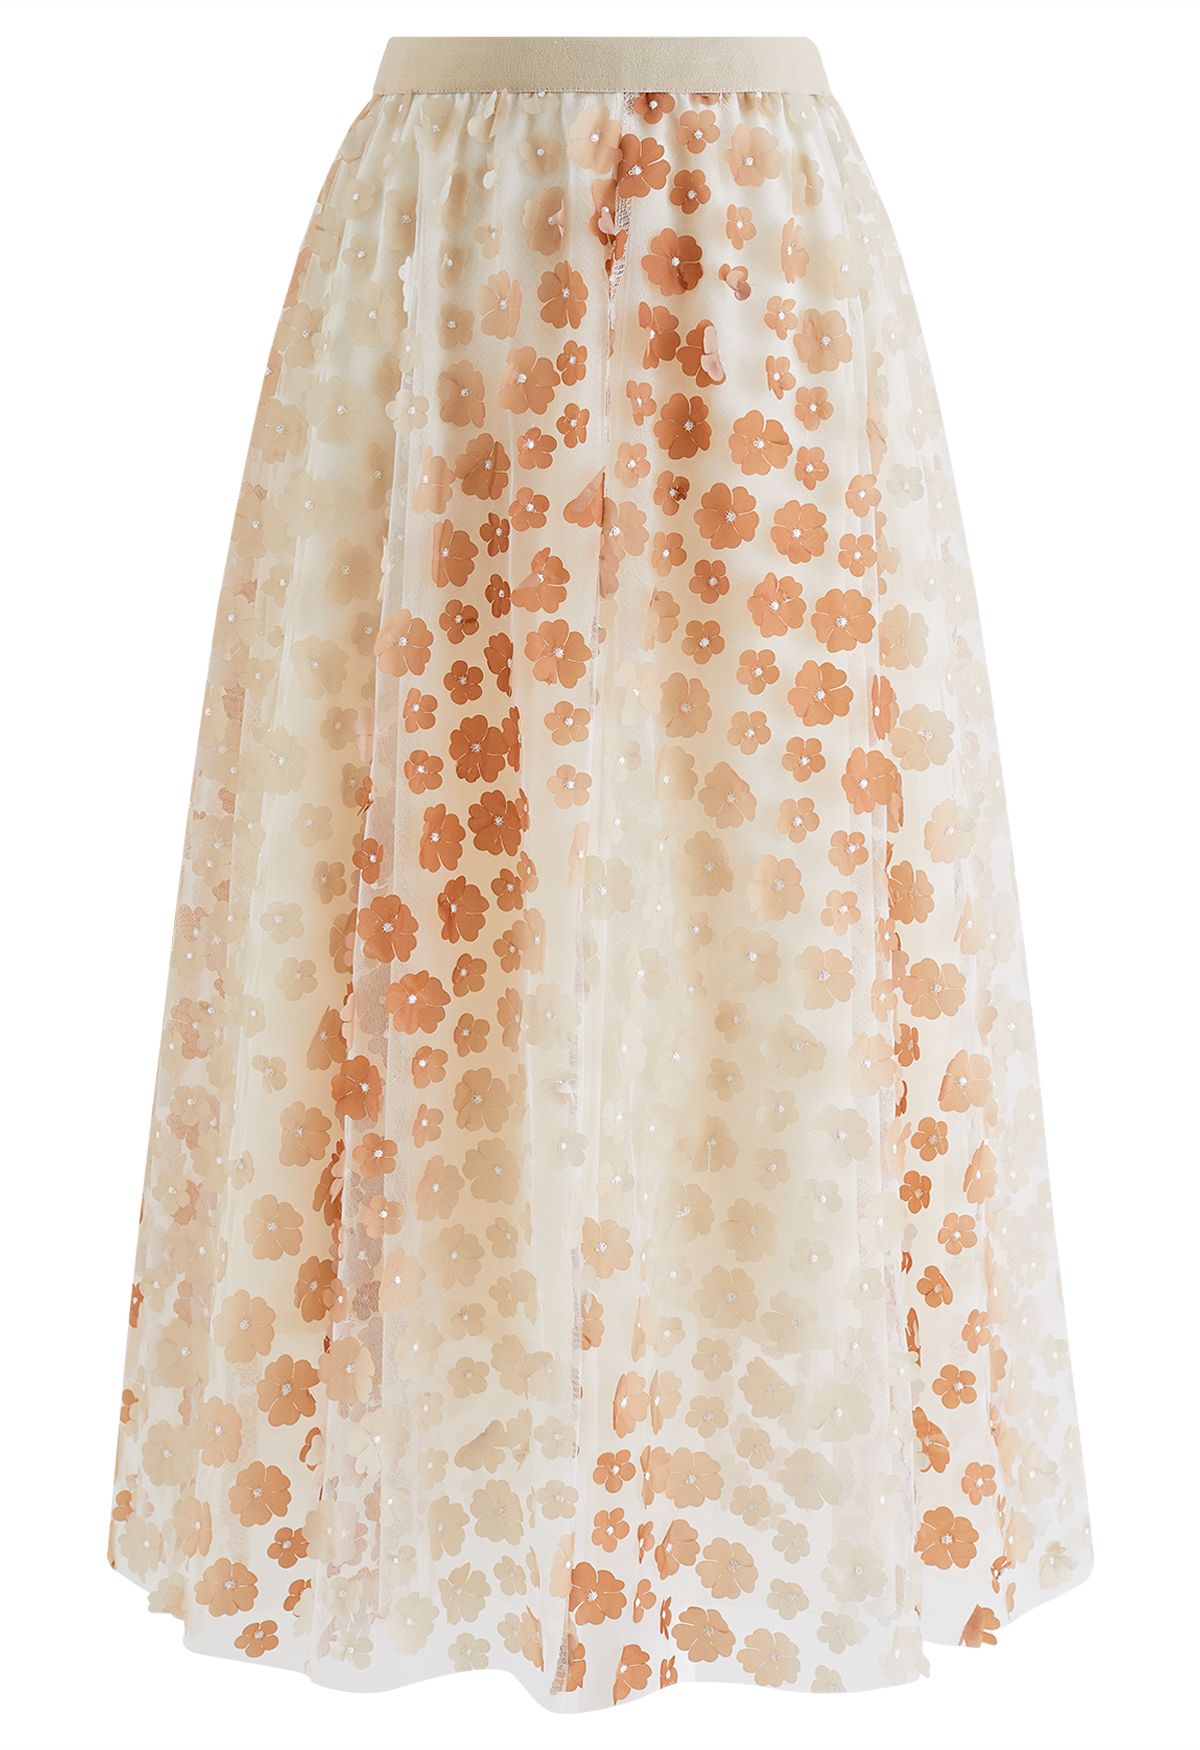 Gradient 3D Flower Double-Layered Mesh Skirt in Apricot